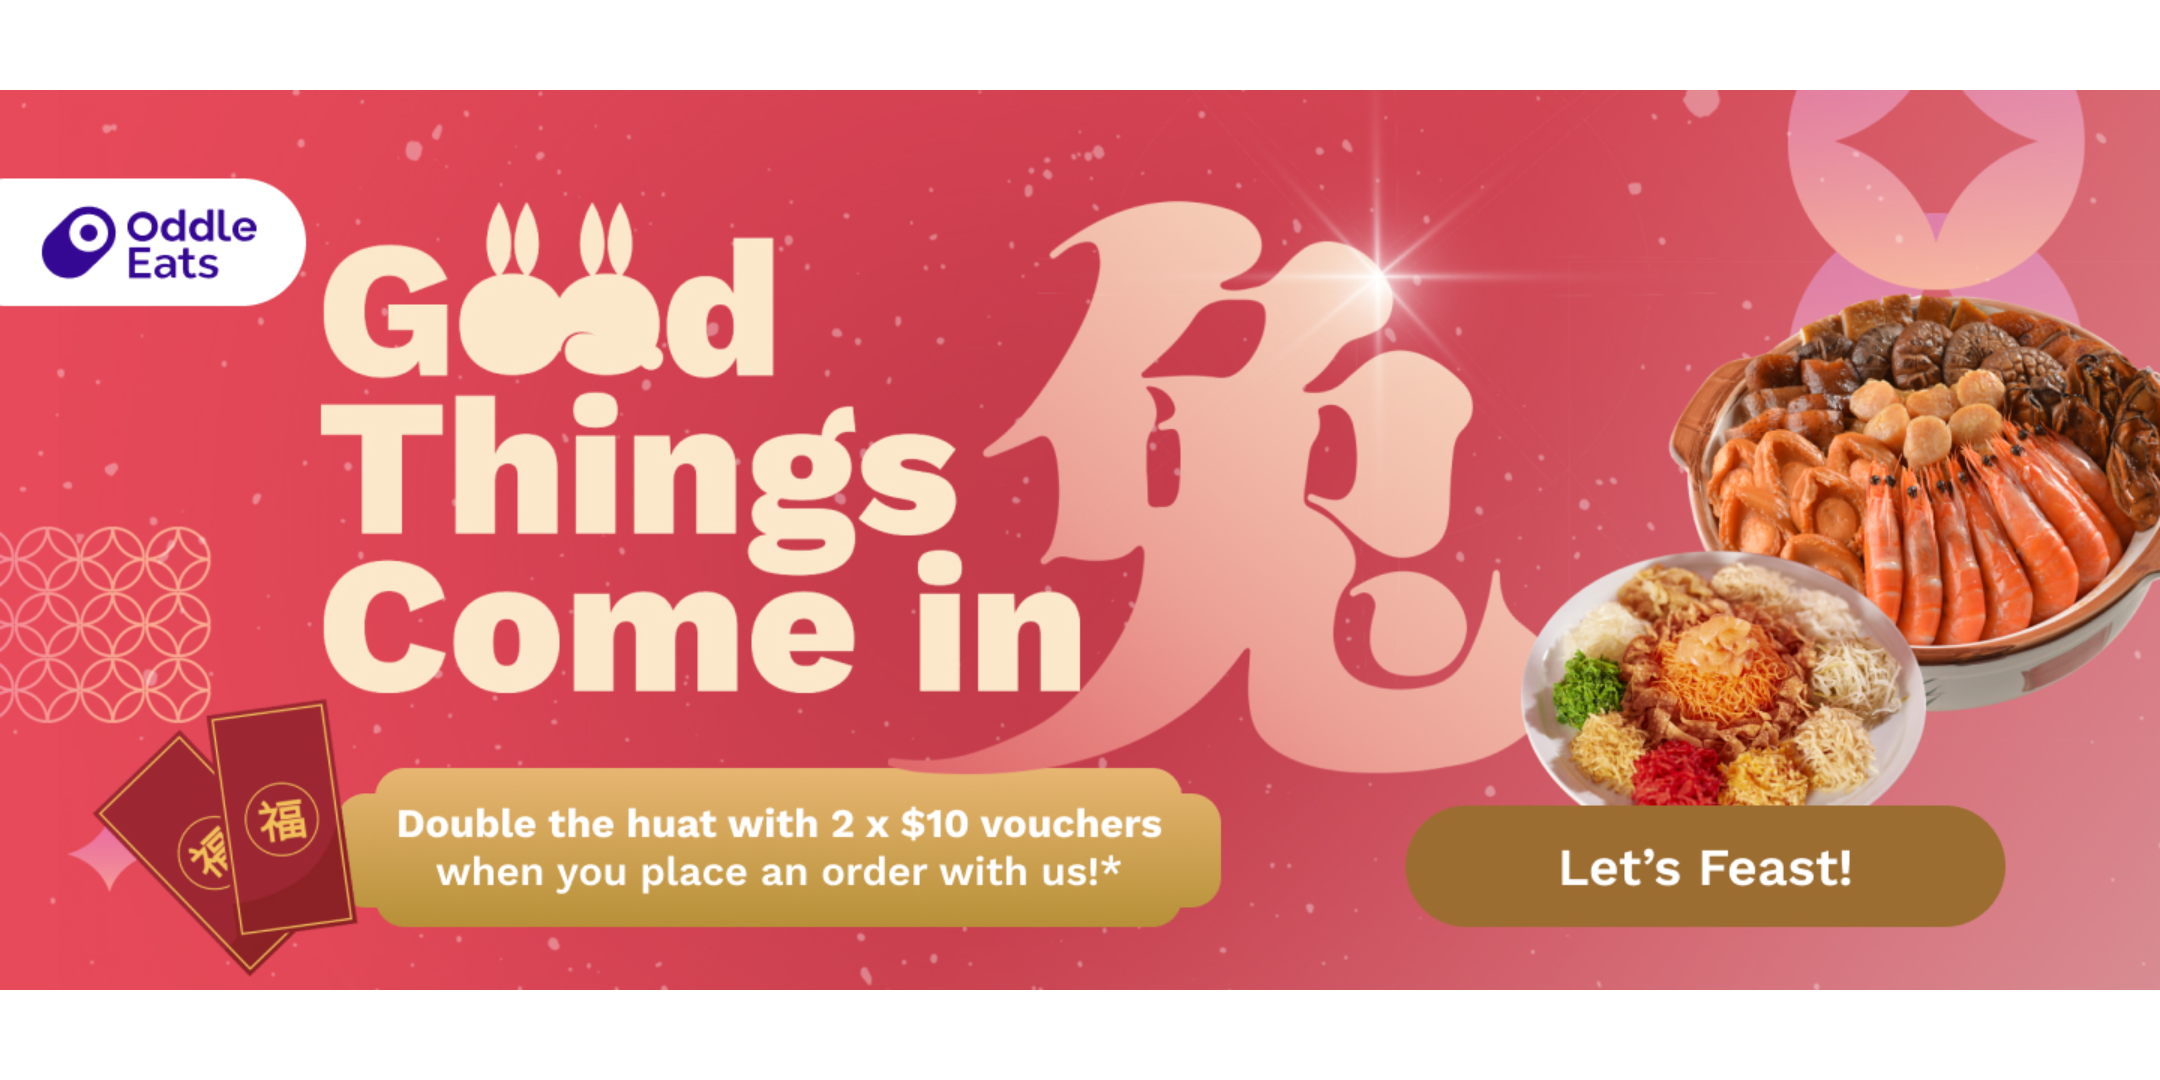 Hop into the Rabbit Year with CNY Bundle Specials & Receive $20 Vouchers on Oddle Eats!